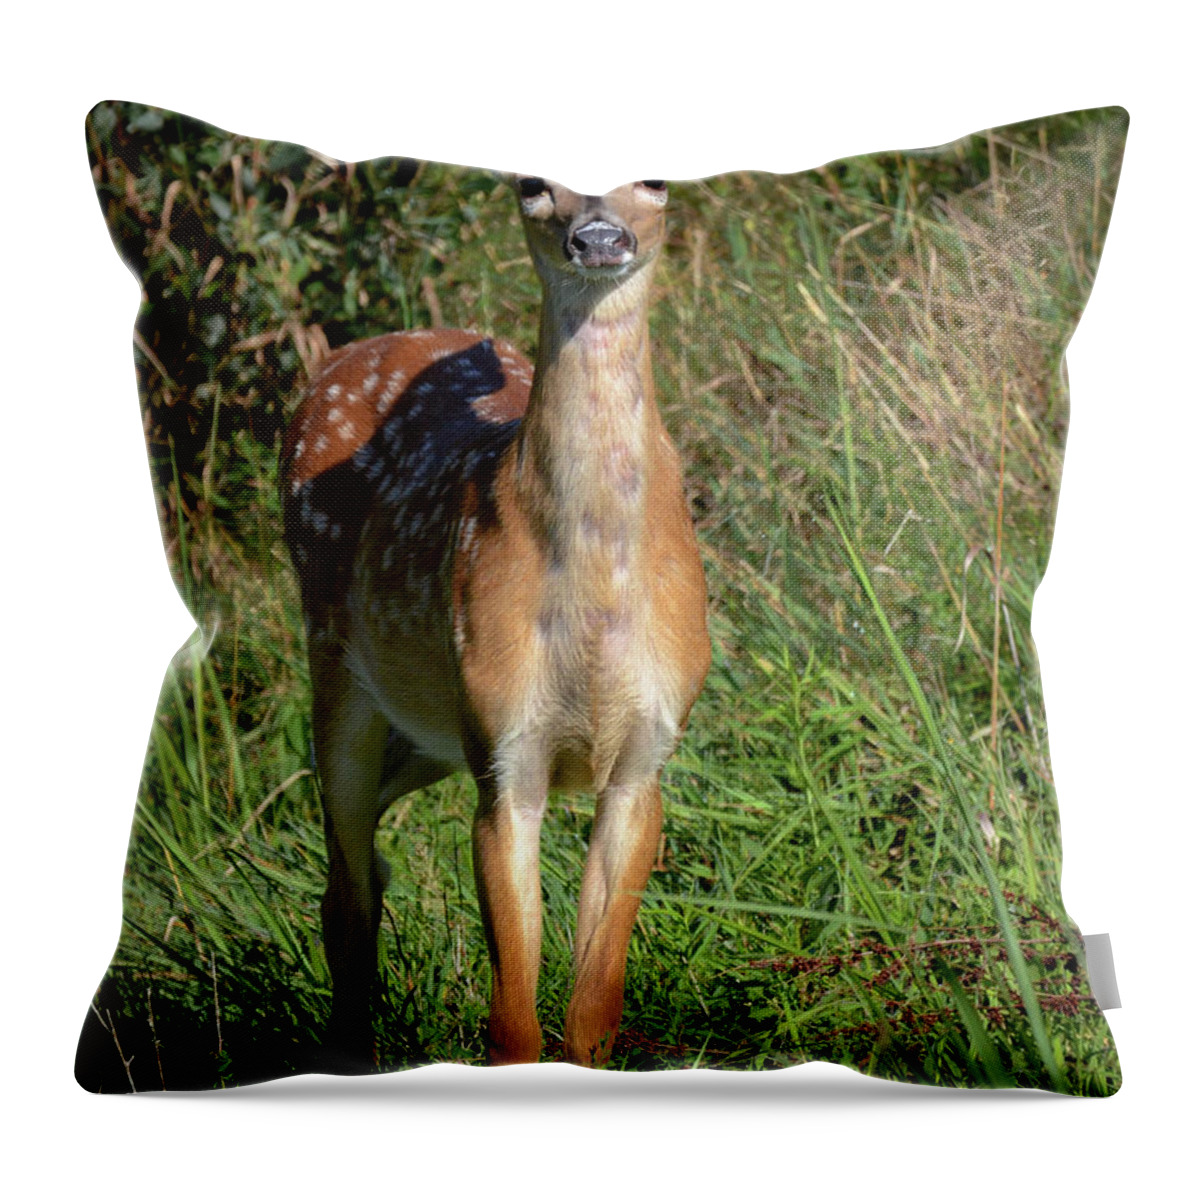 Deer Throw Pillow featuring the photograph I See You by Amy Porter